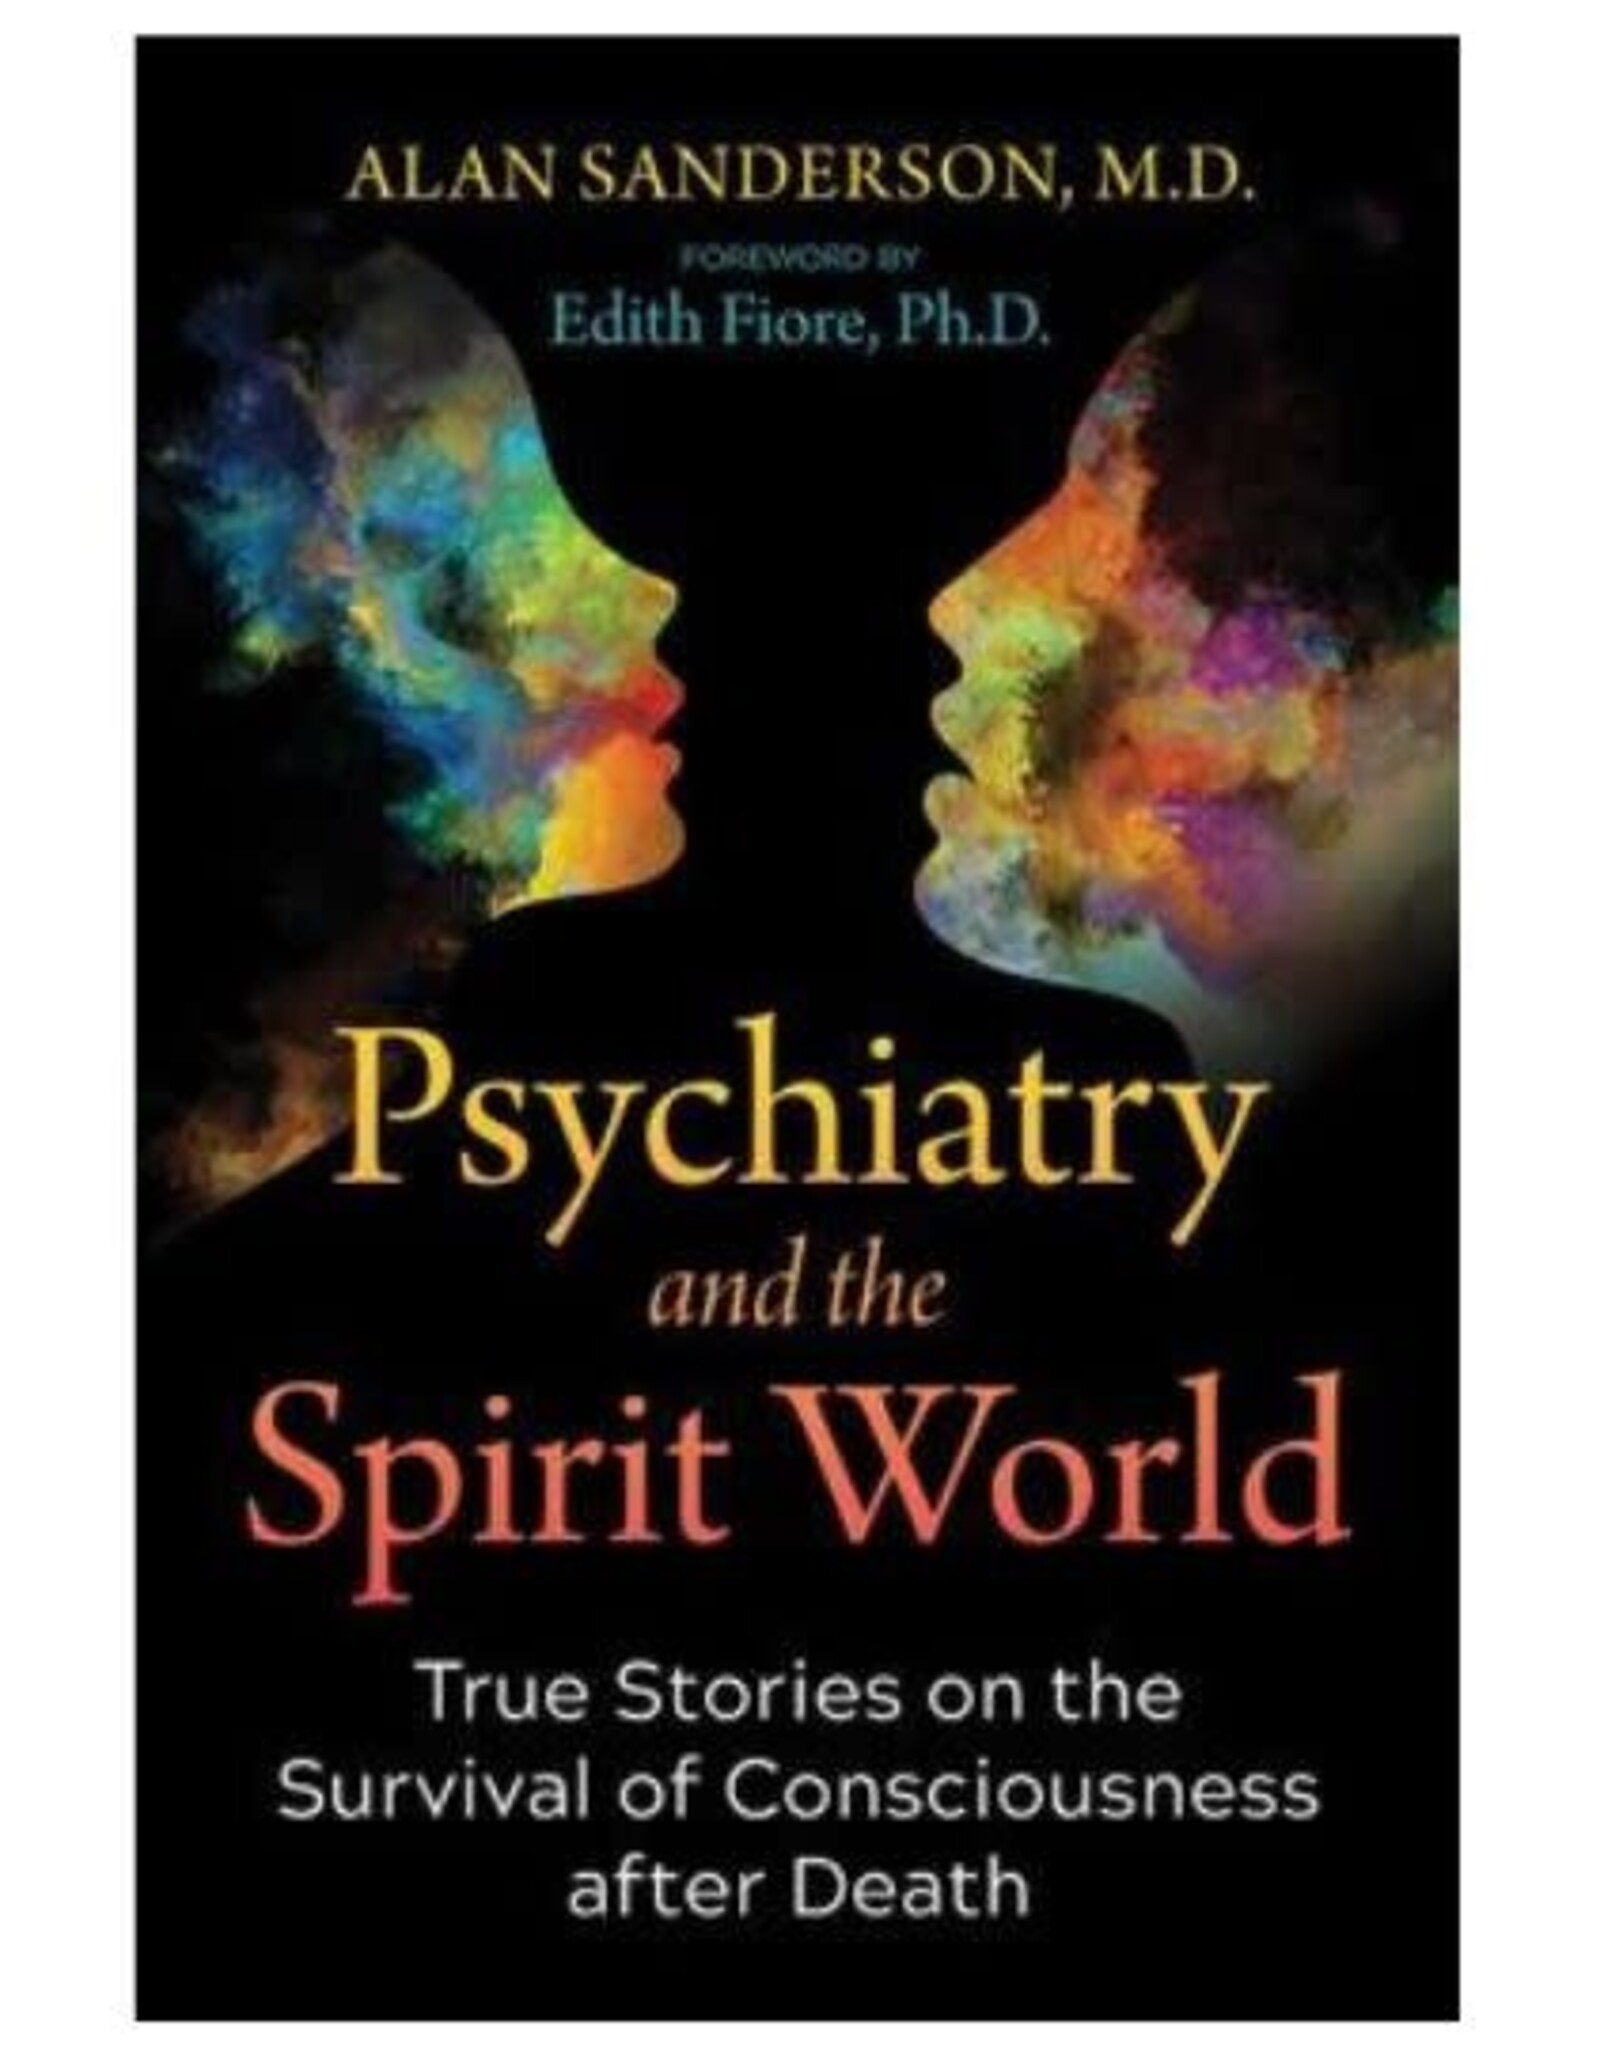 Psychiatry and the Spirit World by Alan Sanderson, M.D